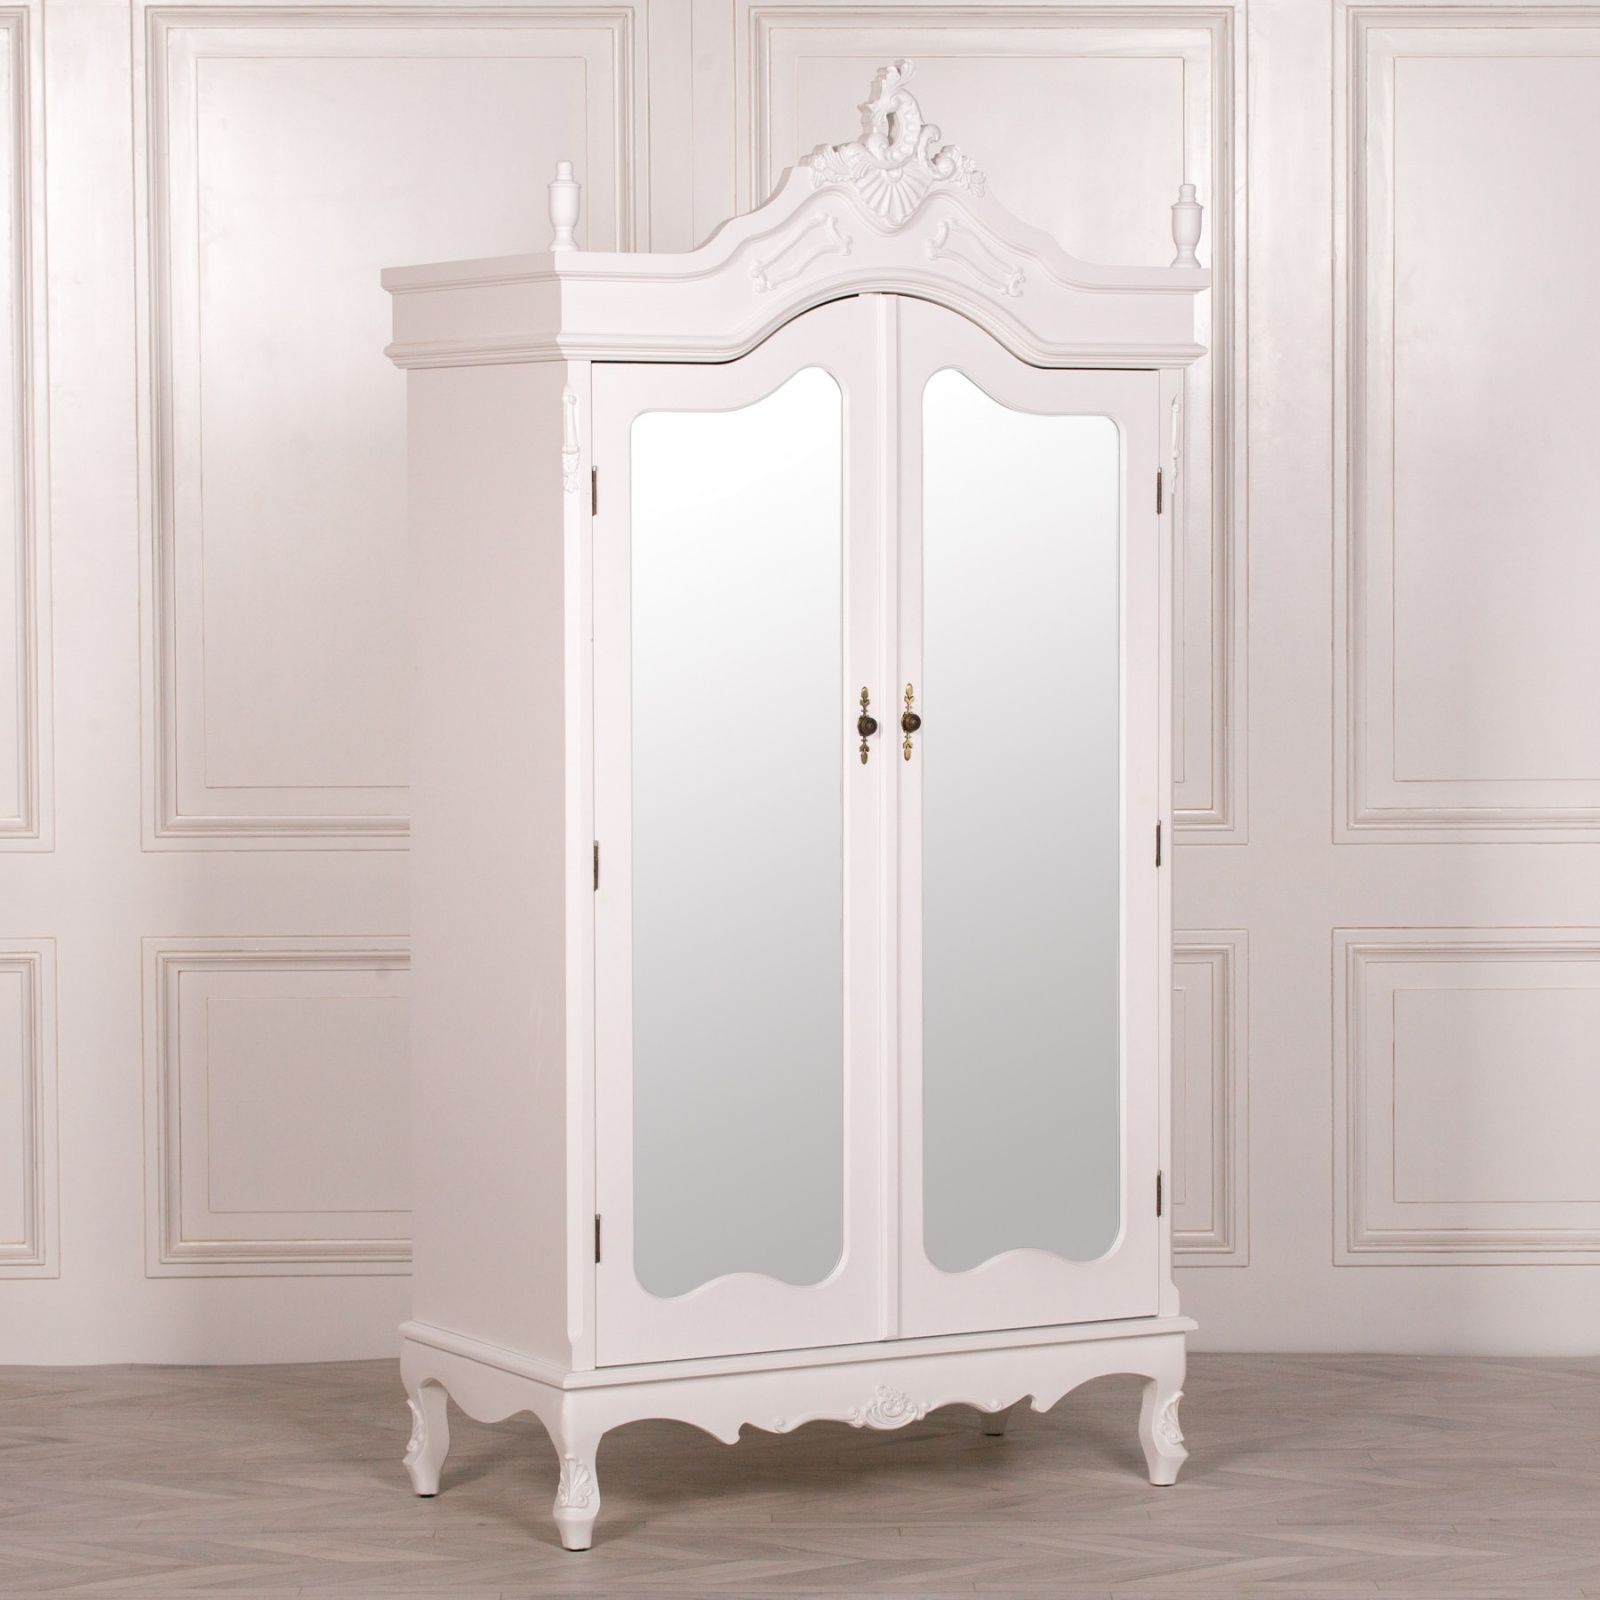 French Style Wardrobe White Mirrored Double Armoire Throughout White French Style Wardrobes (View 2 of 15)